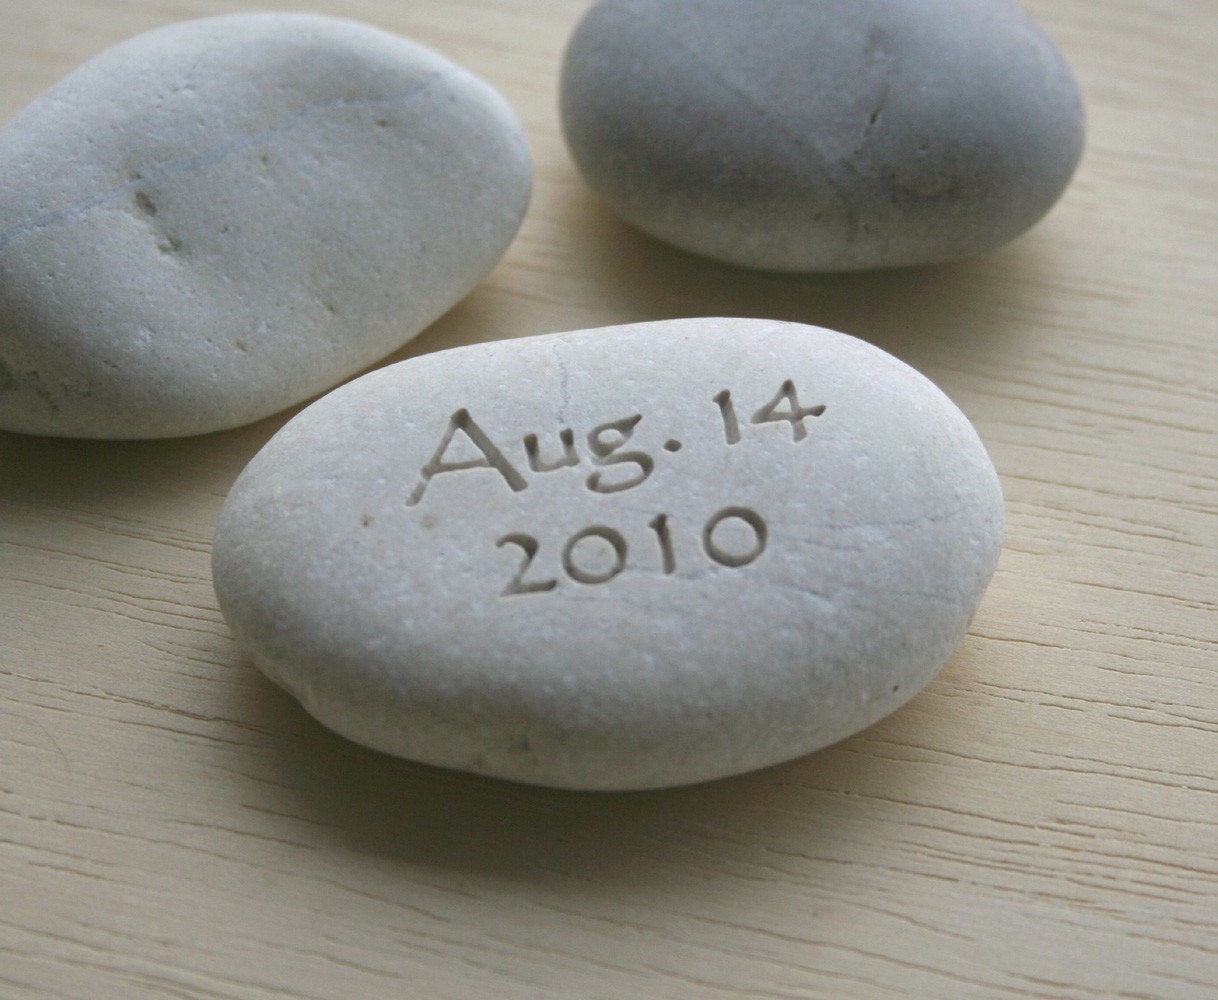 Petite love stone (TM) - you plus me personalized initials pebble with date - Double sided engraved pebble by sjEngraving